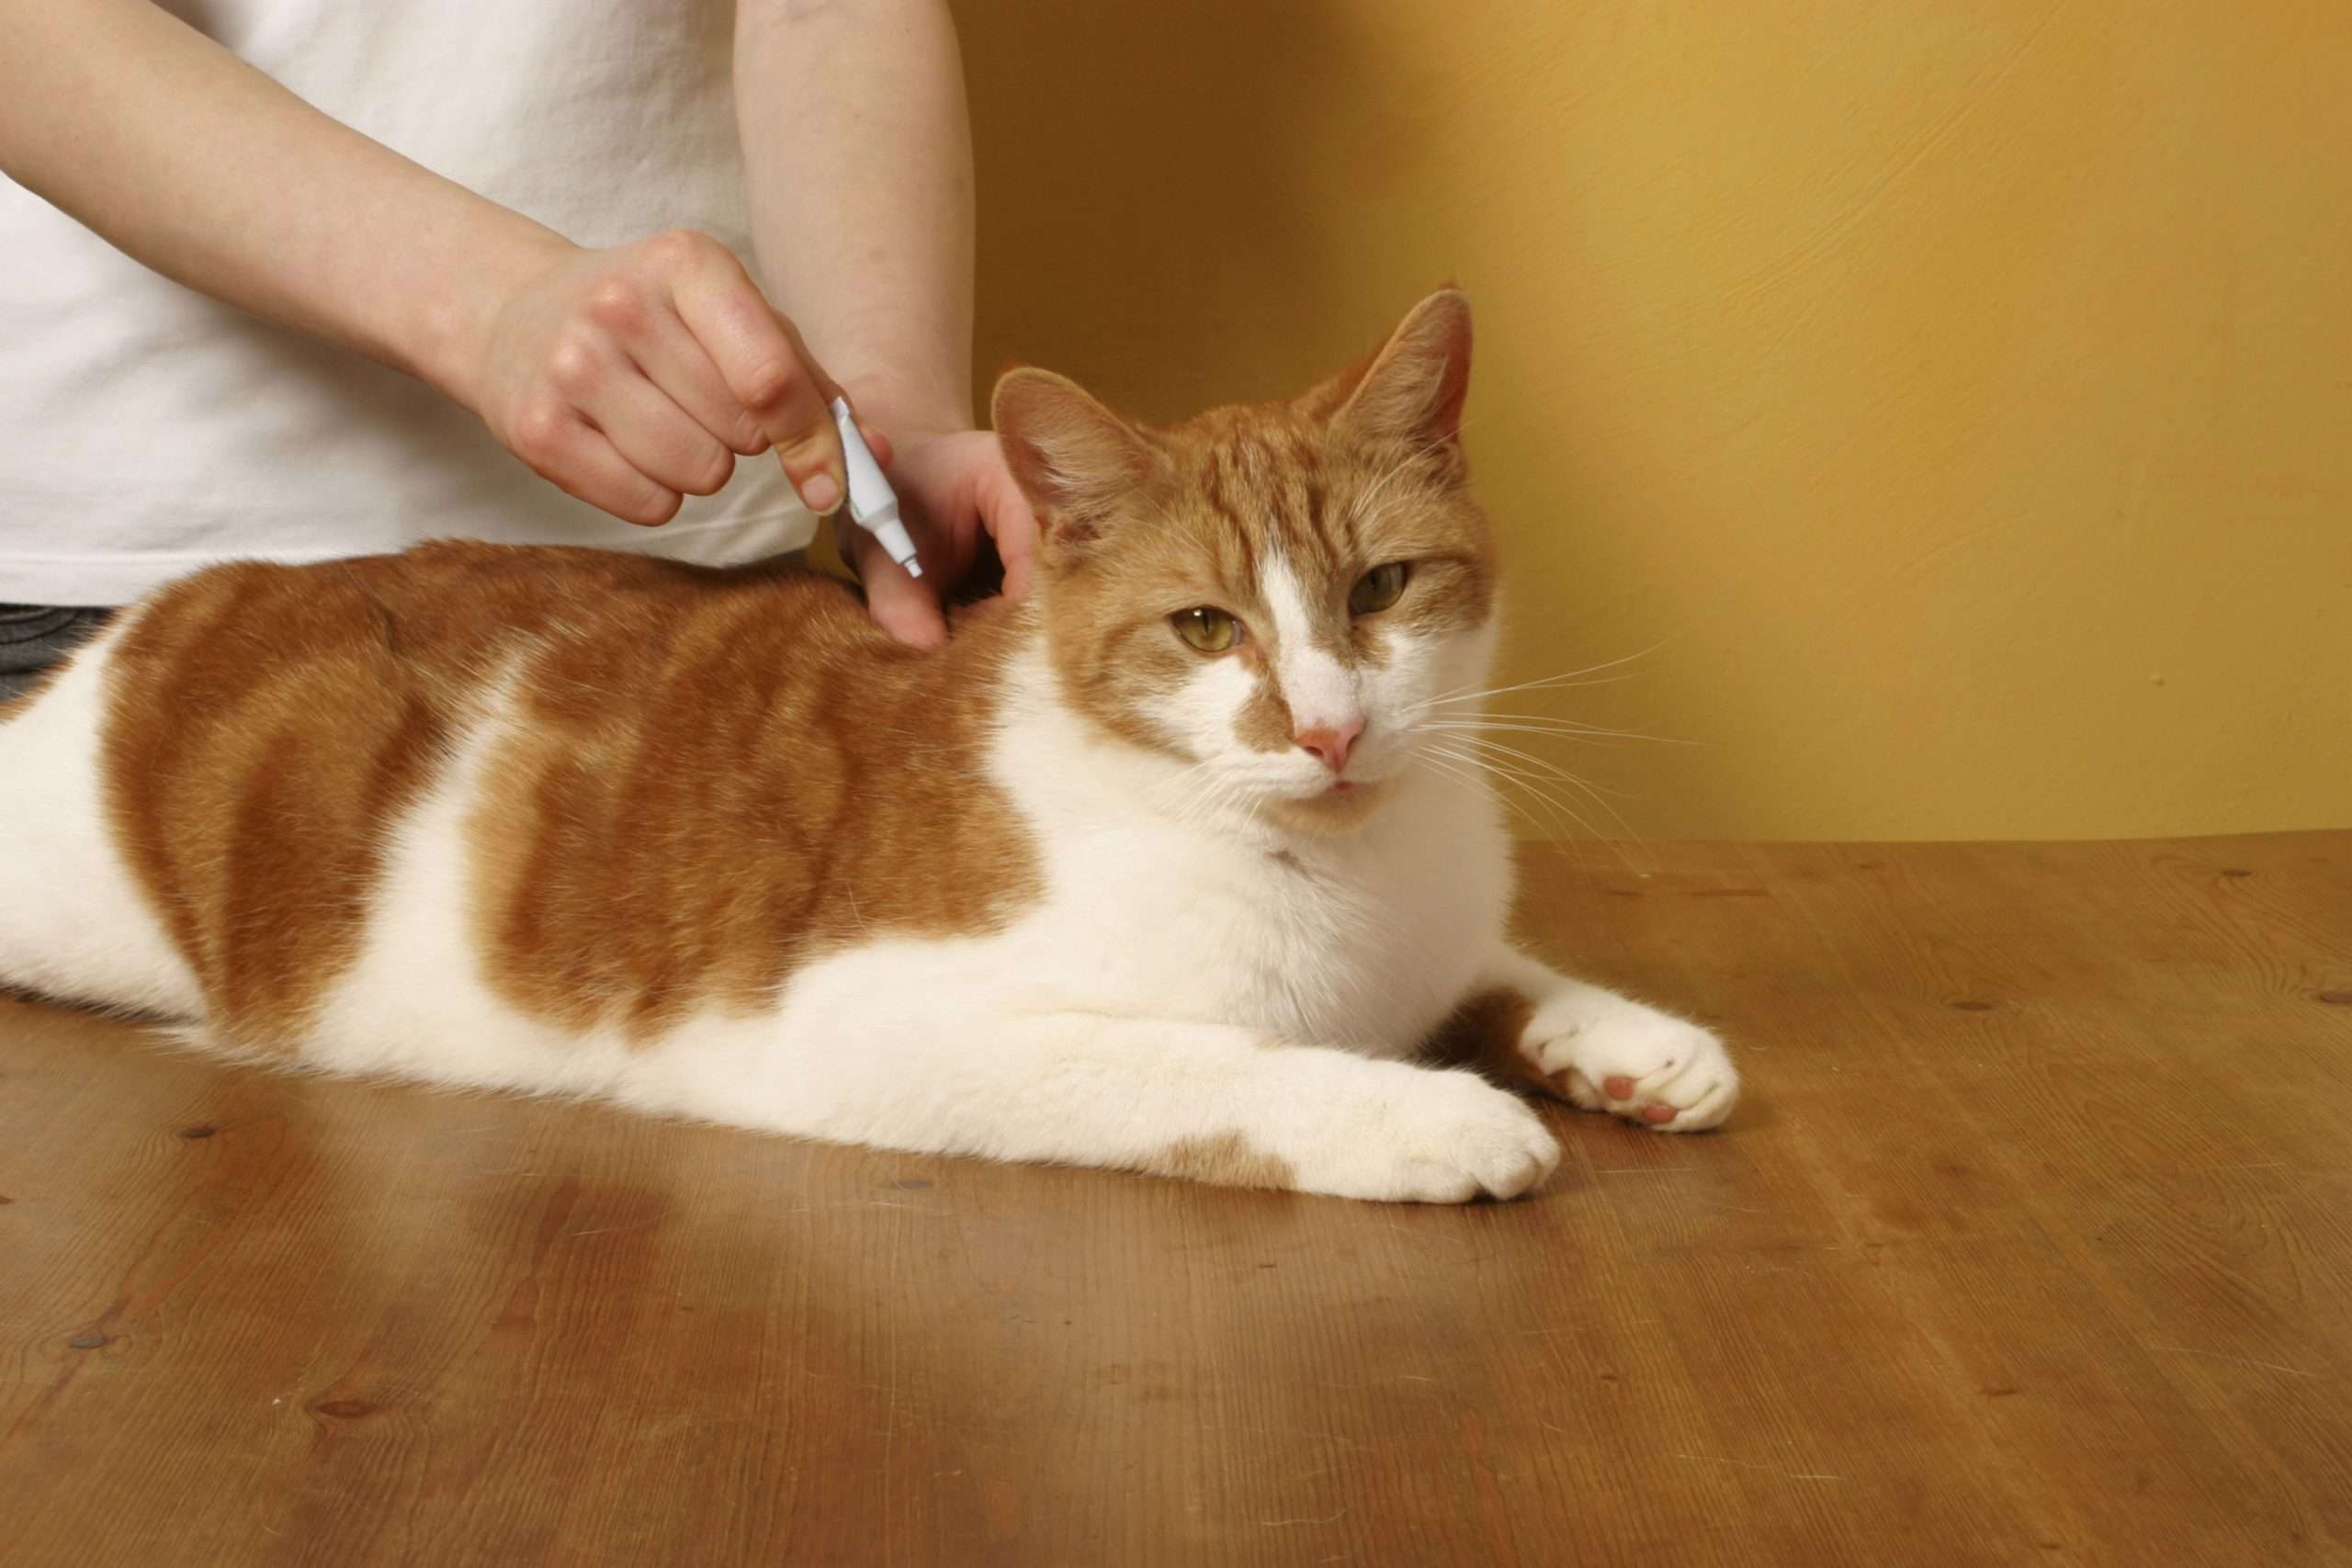 How to Treat Lyme Disease in Cats